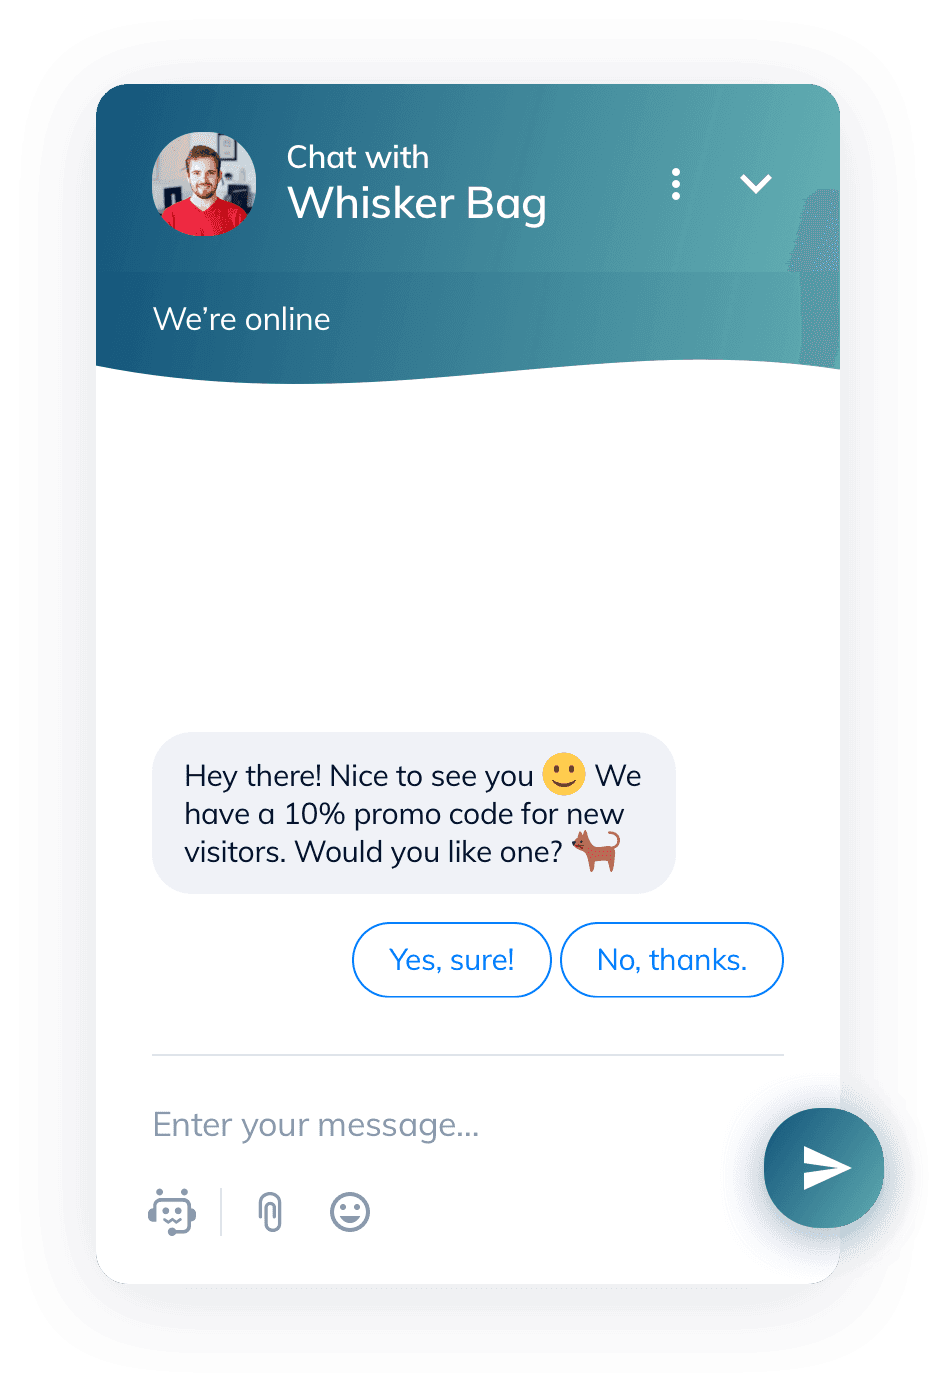 Imagine A Conversation Between Two Users In A Chat App